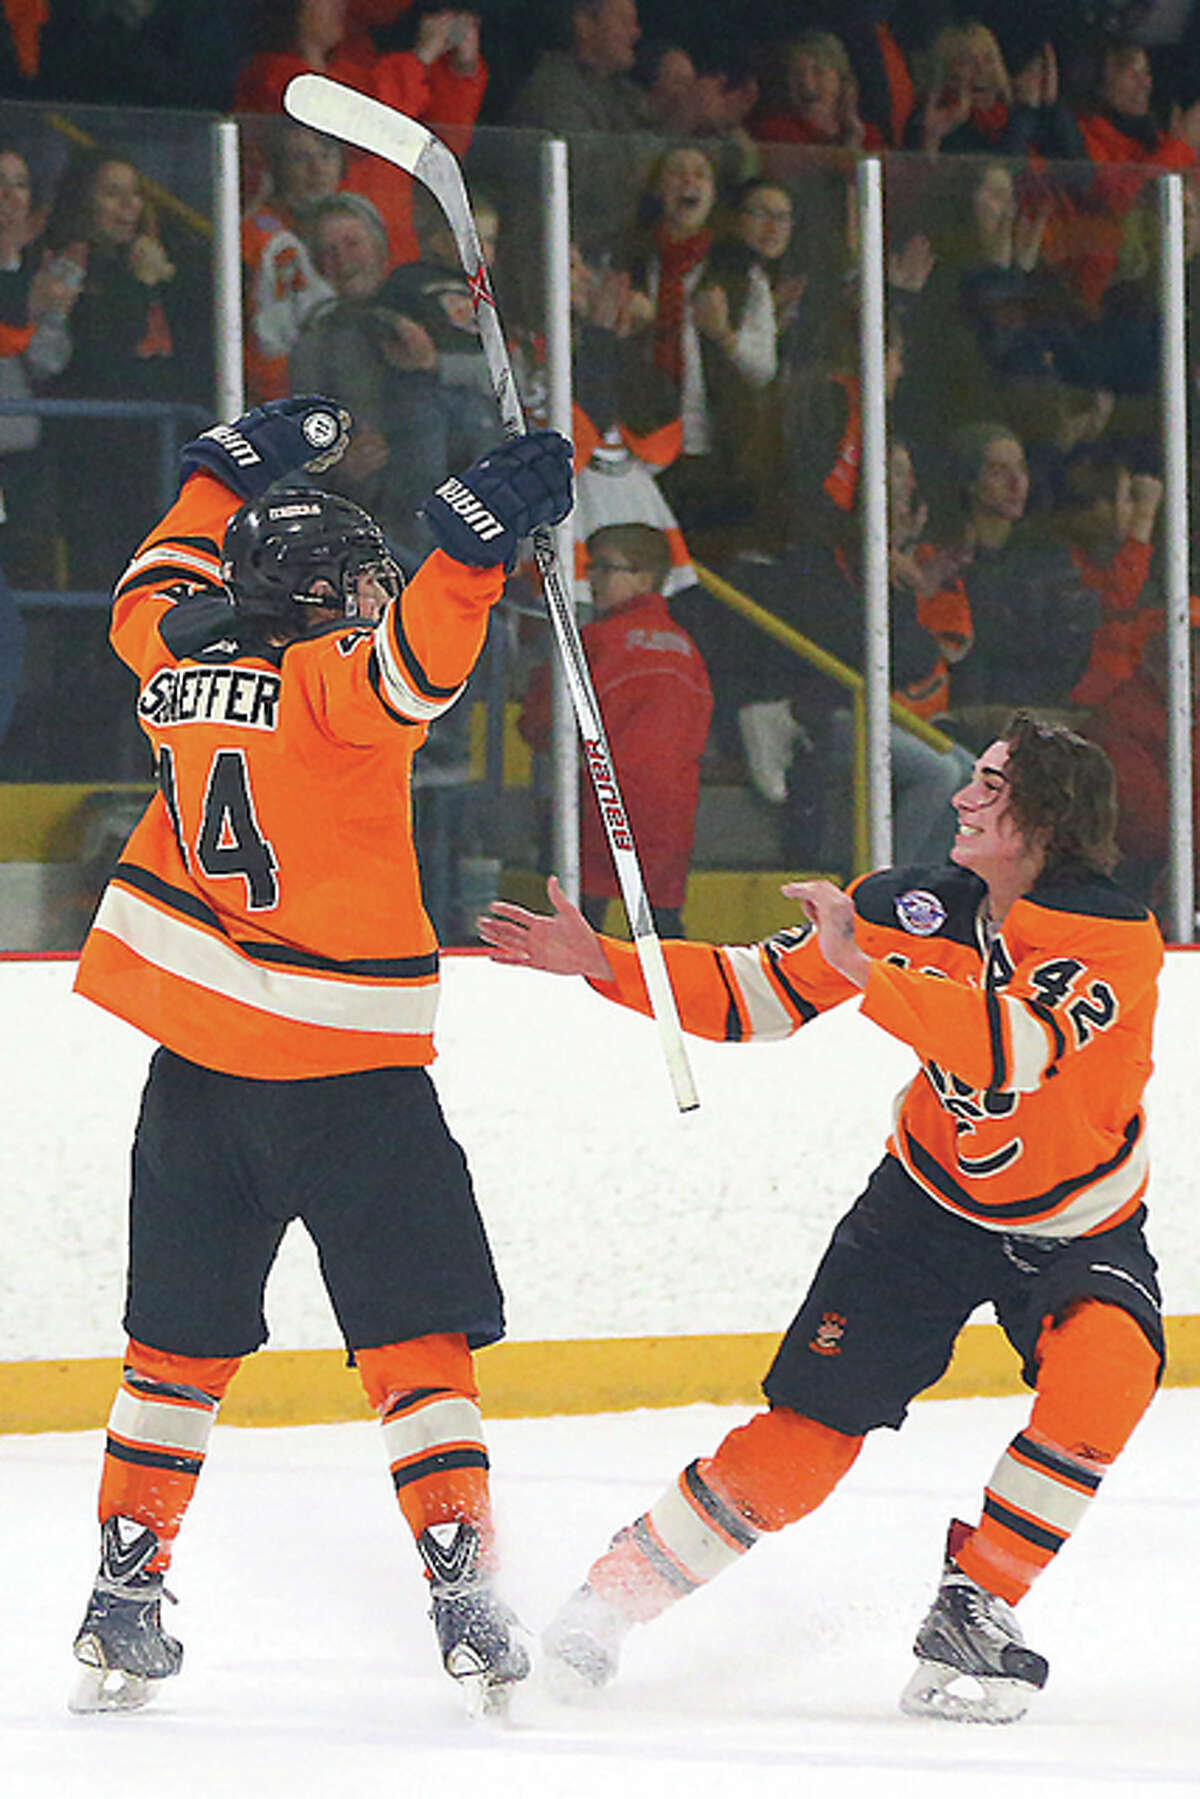 Edwardsville’s Tyler Schaeffer, left, celebrates with Jake Aurelio after scoring the game-winning goal in a shootout during Tuesday’s MVCHA 2A championship at East Alton Ice Arena. Edwardsville won the game 3-2 to secure their fifth straight MVCHA title.